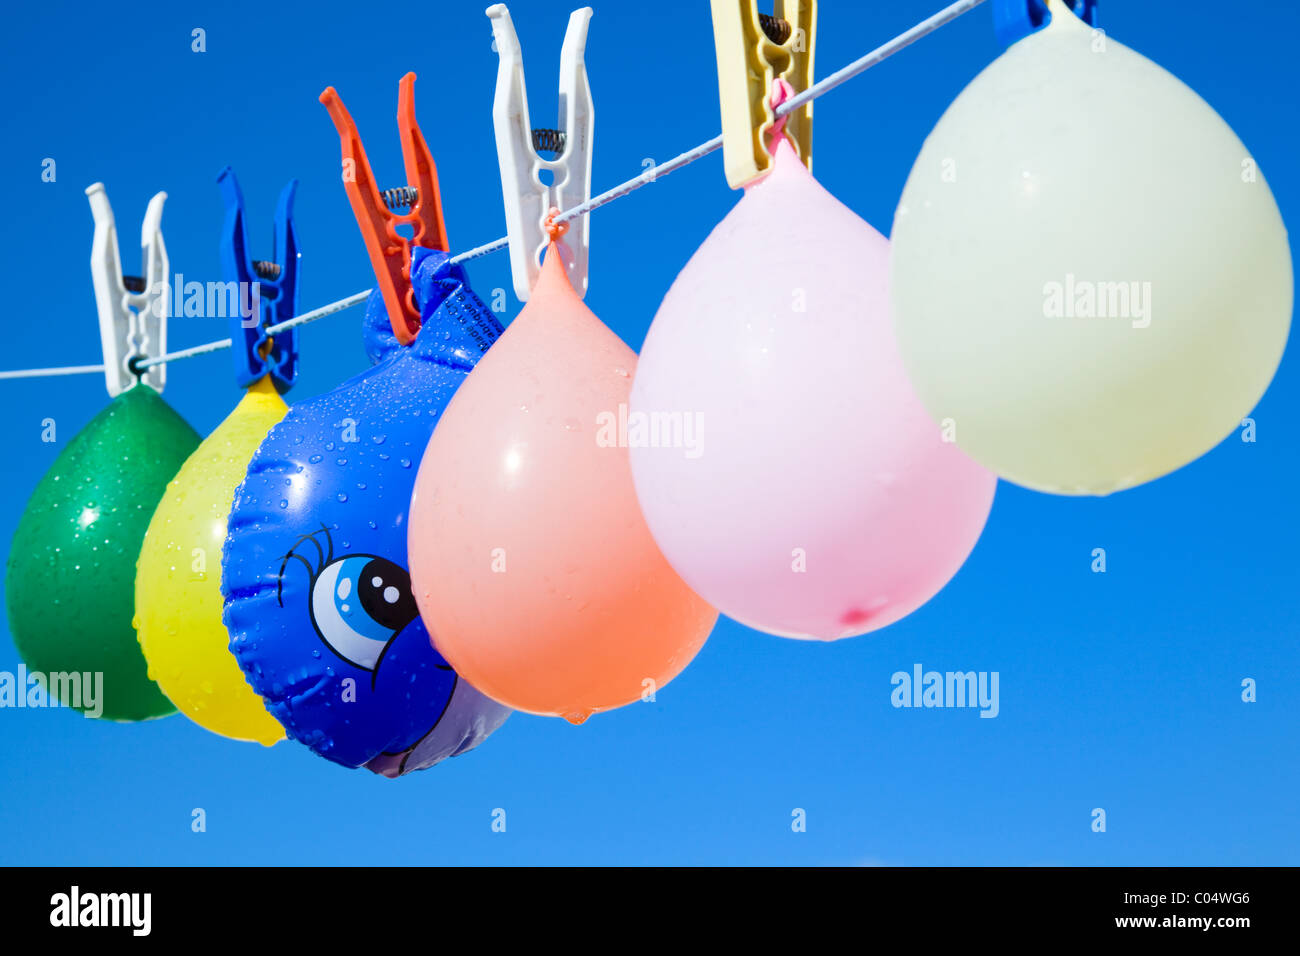 Toy fish hidden between balloons hanging from a clothesline Stock Photo